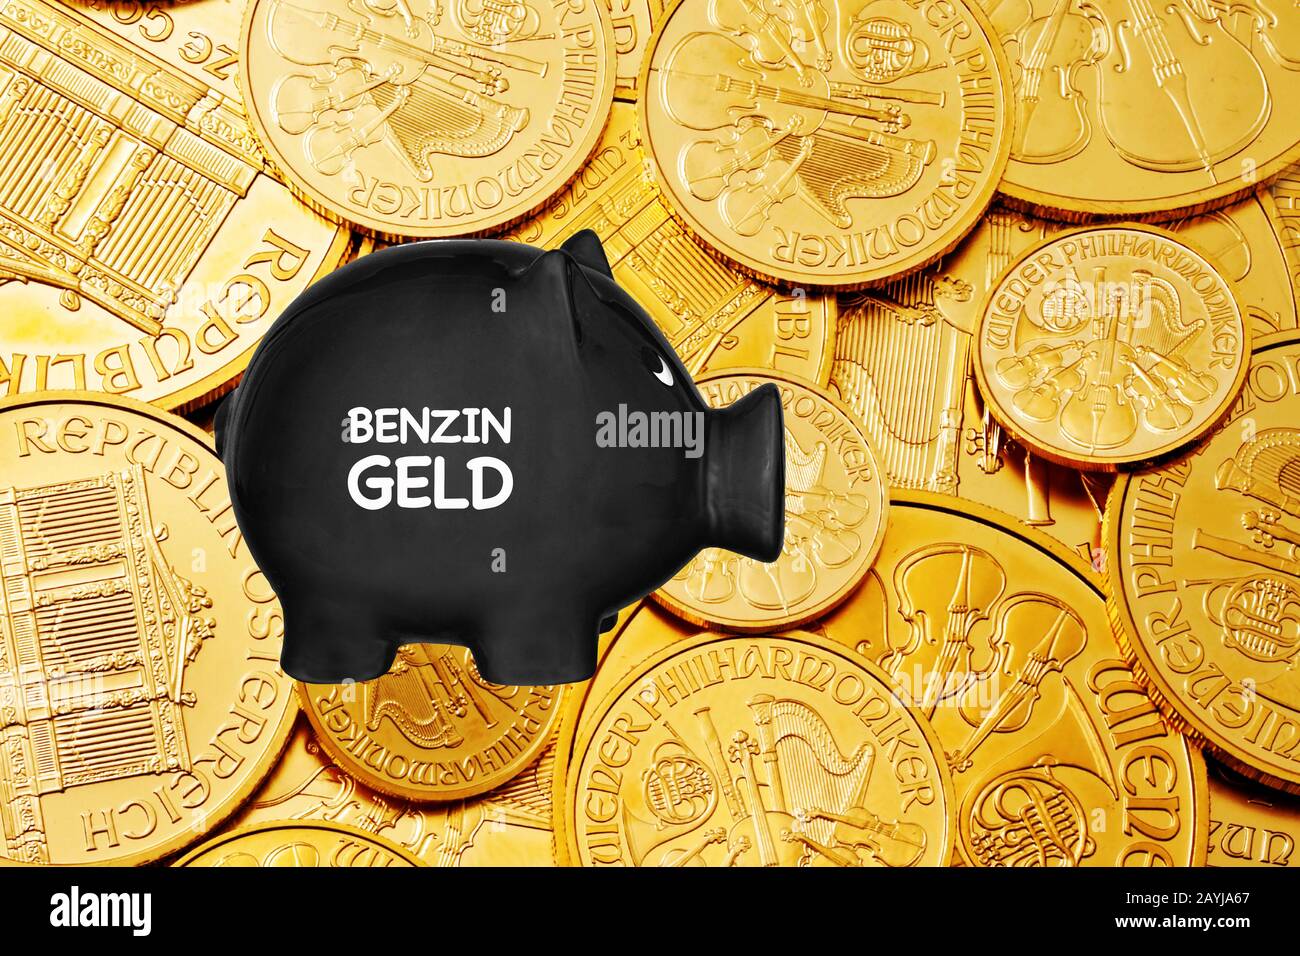 black piggy bank with sun glasses with the lettering Benzingeld, gas allowance, coins in background, composing Stock Photo